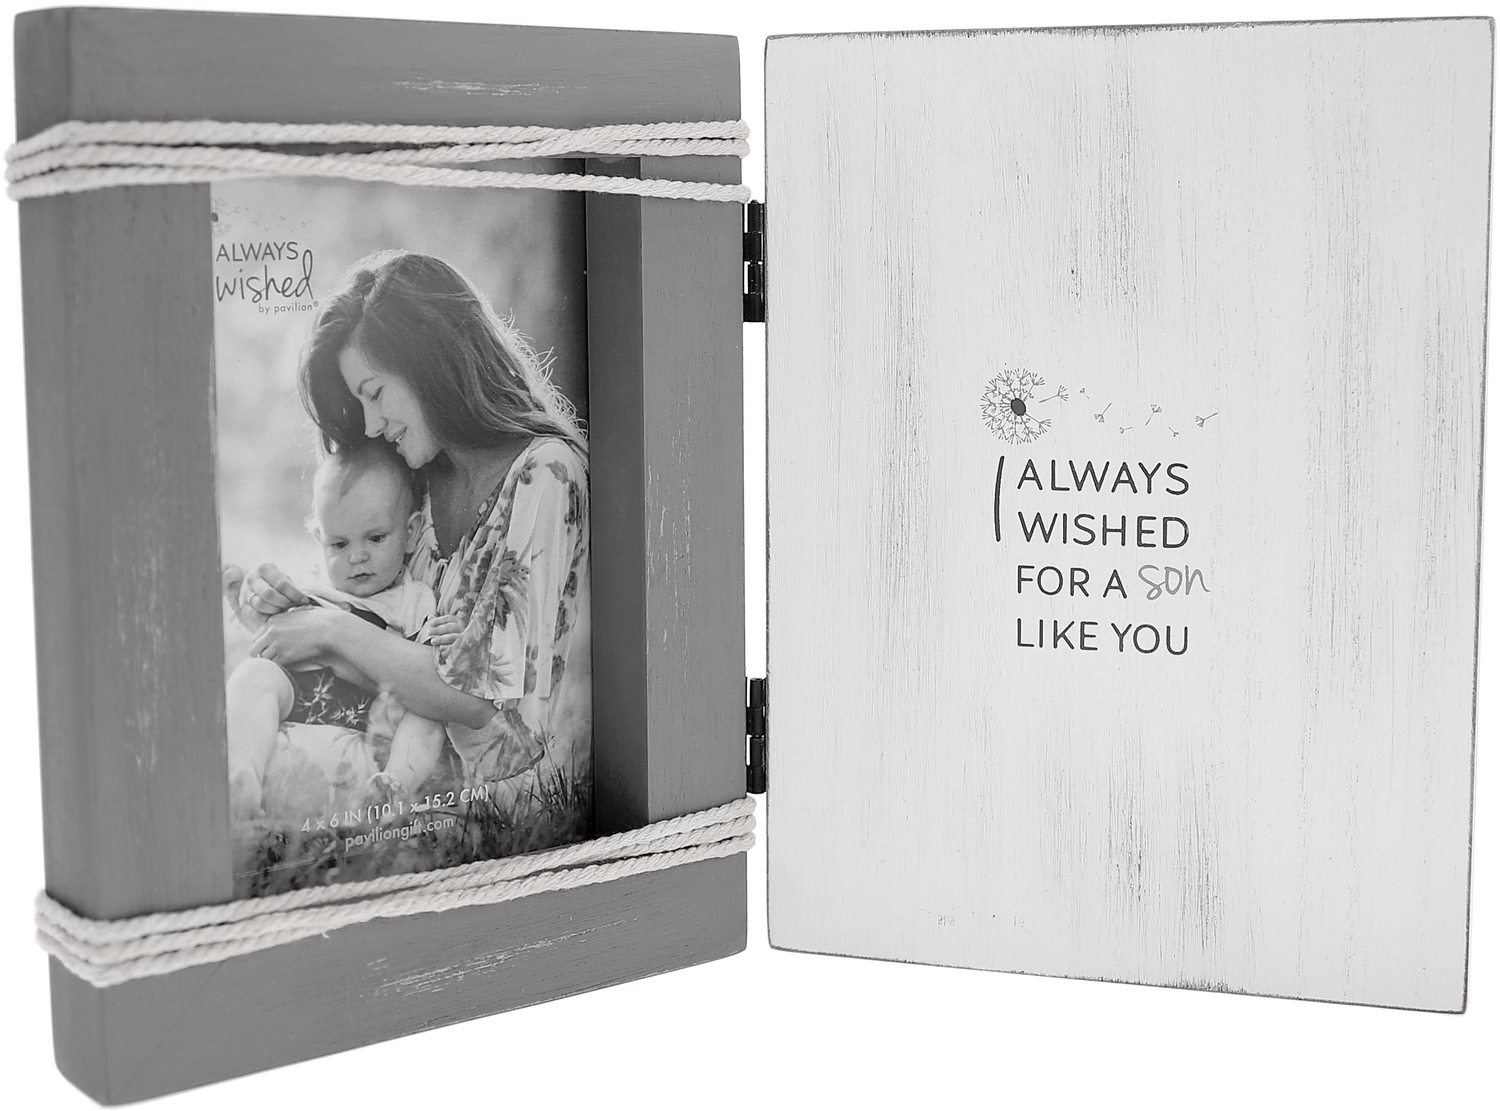 Son Like You by I Always Wished - Son Like You - 5.5" x 7.5" Hinged Sentiment Frame (Holds 4" x 6" Photo)